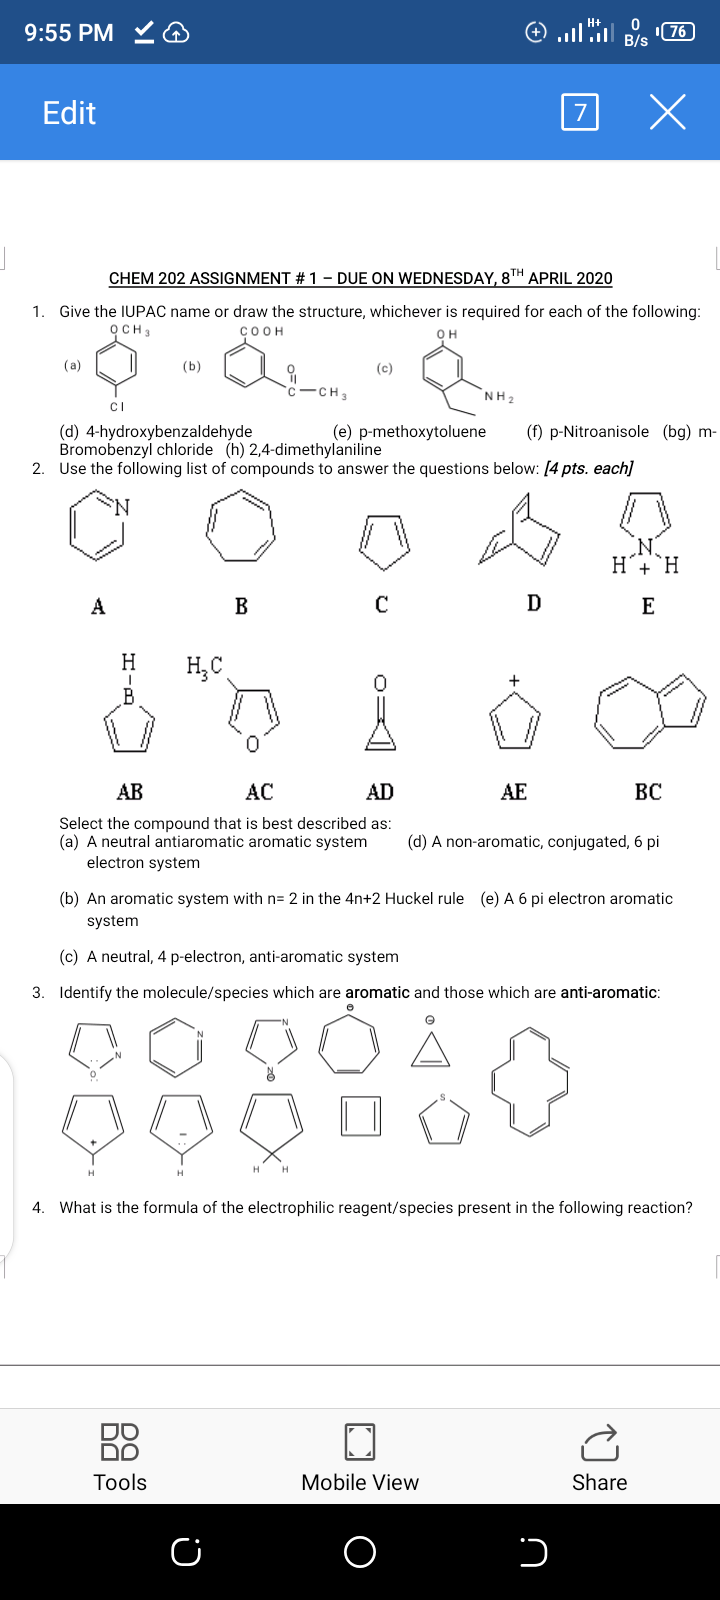 9:55 PM
76
B/s
Edit
CHEM 202 ASSIGNMENT # 1 – DUE ON WEDNESDAY, 8TH APRIL 2020
1. Give the IUPAC name or draw the structure, whichever is required for each of the following:
осHз
COOH
OH
(a)
(b)
(c)
-CH3
NH2
CI
(d) 4-hydroxybenzaldehyde
Bromobenzyl chloride (h) 2,4-dimethylaniline
2. Use the following list of compounds to answer the questions below: [4 pts. each]
(e) p-methoxytoluene
(f) p-Nitroanisole (bg) m-
D
Н
НС
AB
AC
AD
AE
BC
Select the compound that is best described as:
(a) A neutral antiaromatic aromatic system
electron system
(d) A non-aromatic, conjugated, 6 pi
(b) An aromatic system with n= 2 in the 4n+2 Huckel rule (e) A 6 pi electron aromatic
system
(c) A neutral, 4 p-electron, anti-aromatic system
3. Identify the molecule/species which are aromatic and those which are anti-aromatic:
4. What is the formula of the electrophilic reagent/species present in the following reaction?
88
Tools
Mobile View
Share
